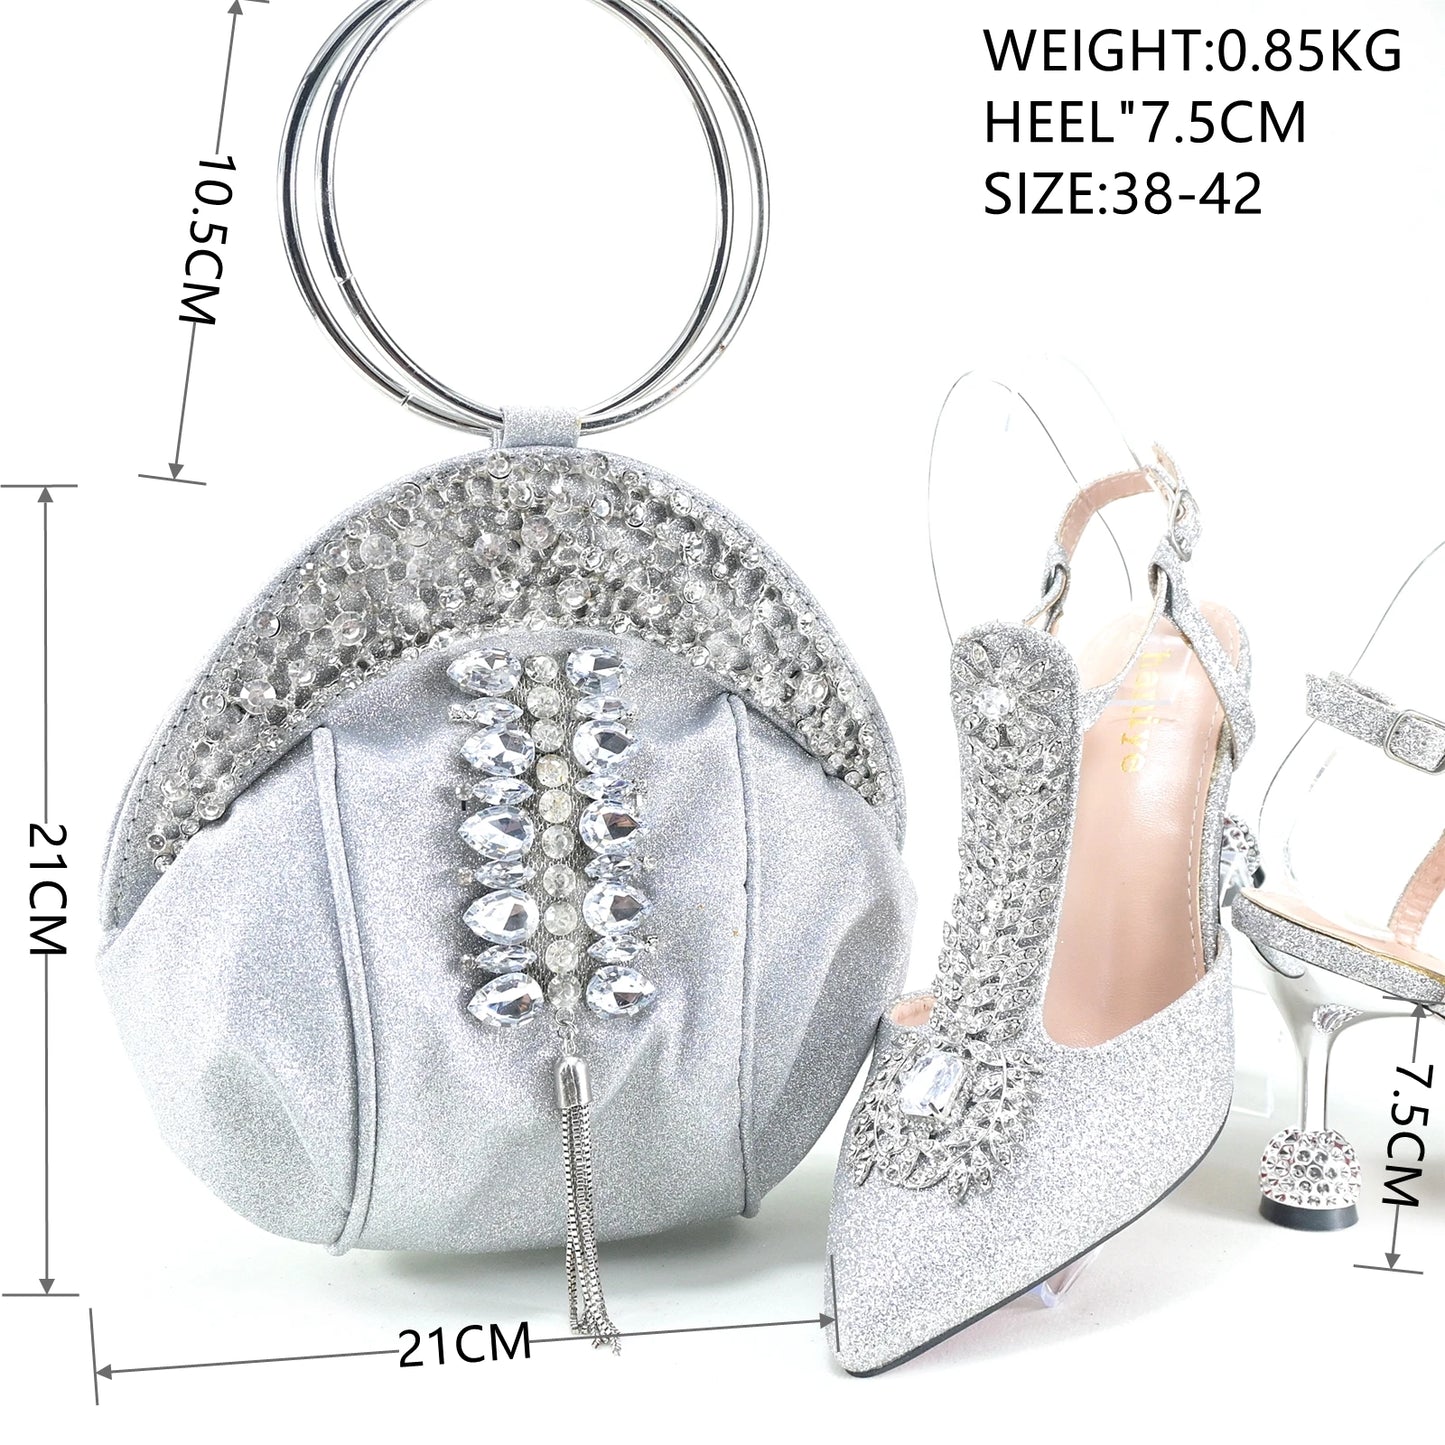 Doershow beautiful Italian Shoes And Bag Sets For Evening Party With Stones Italian Leather Handbags Match Bags! HRT1-33